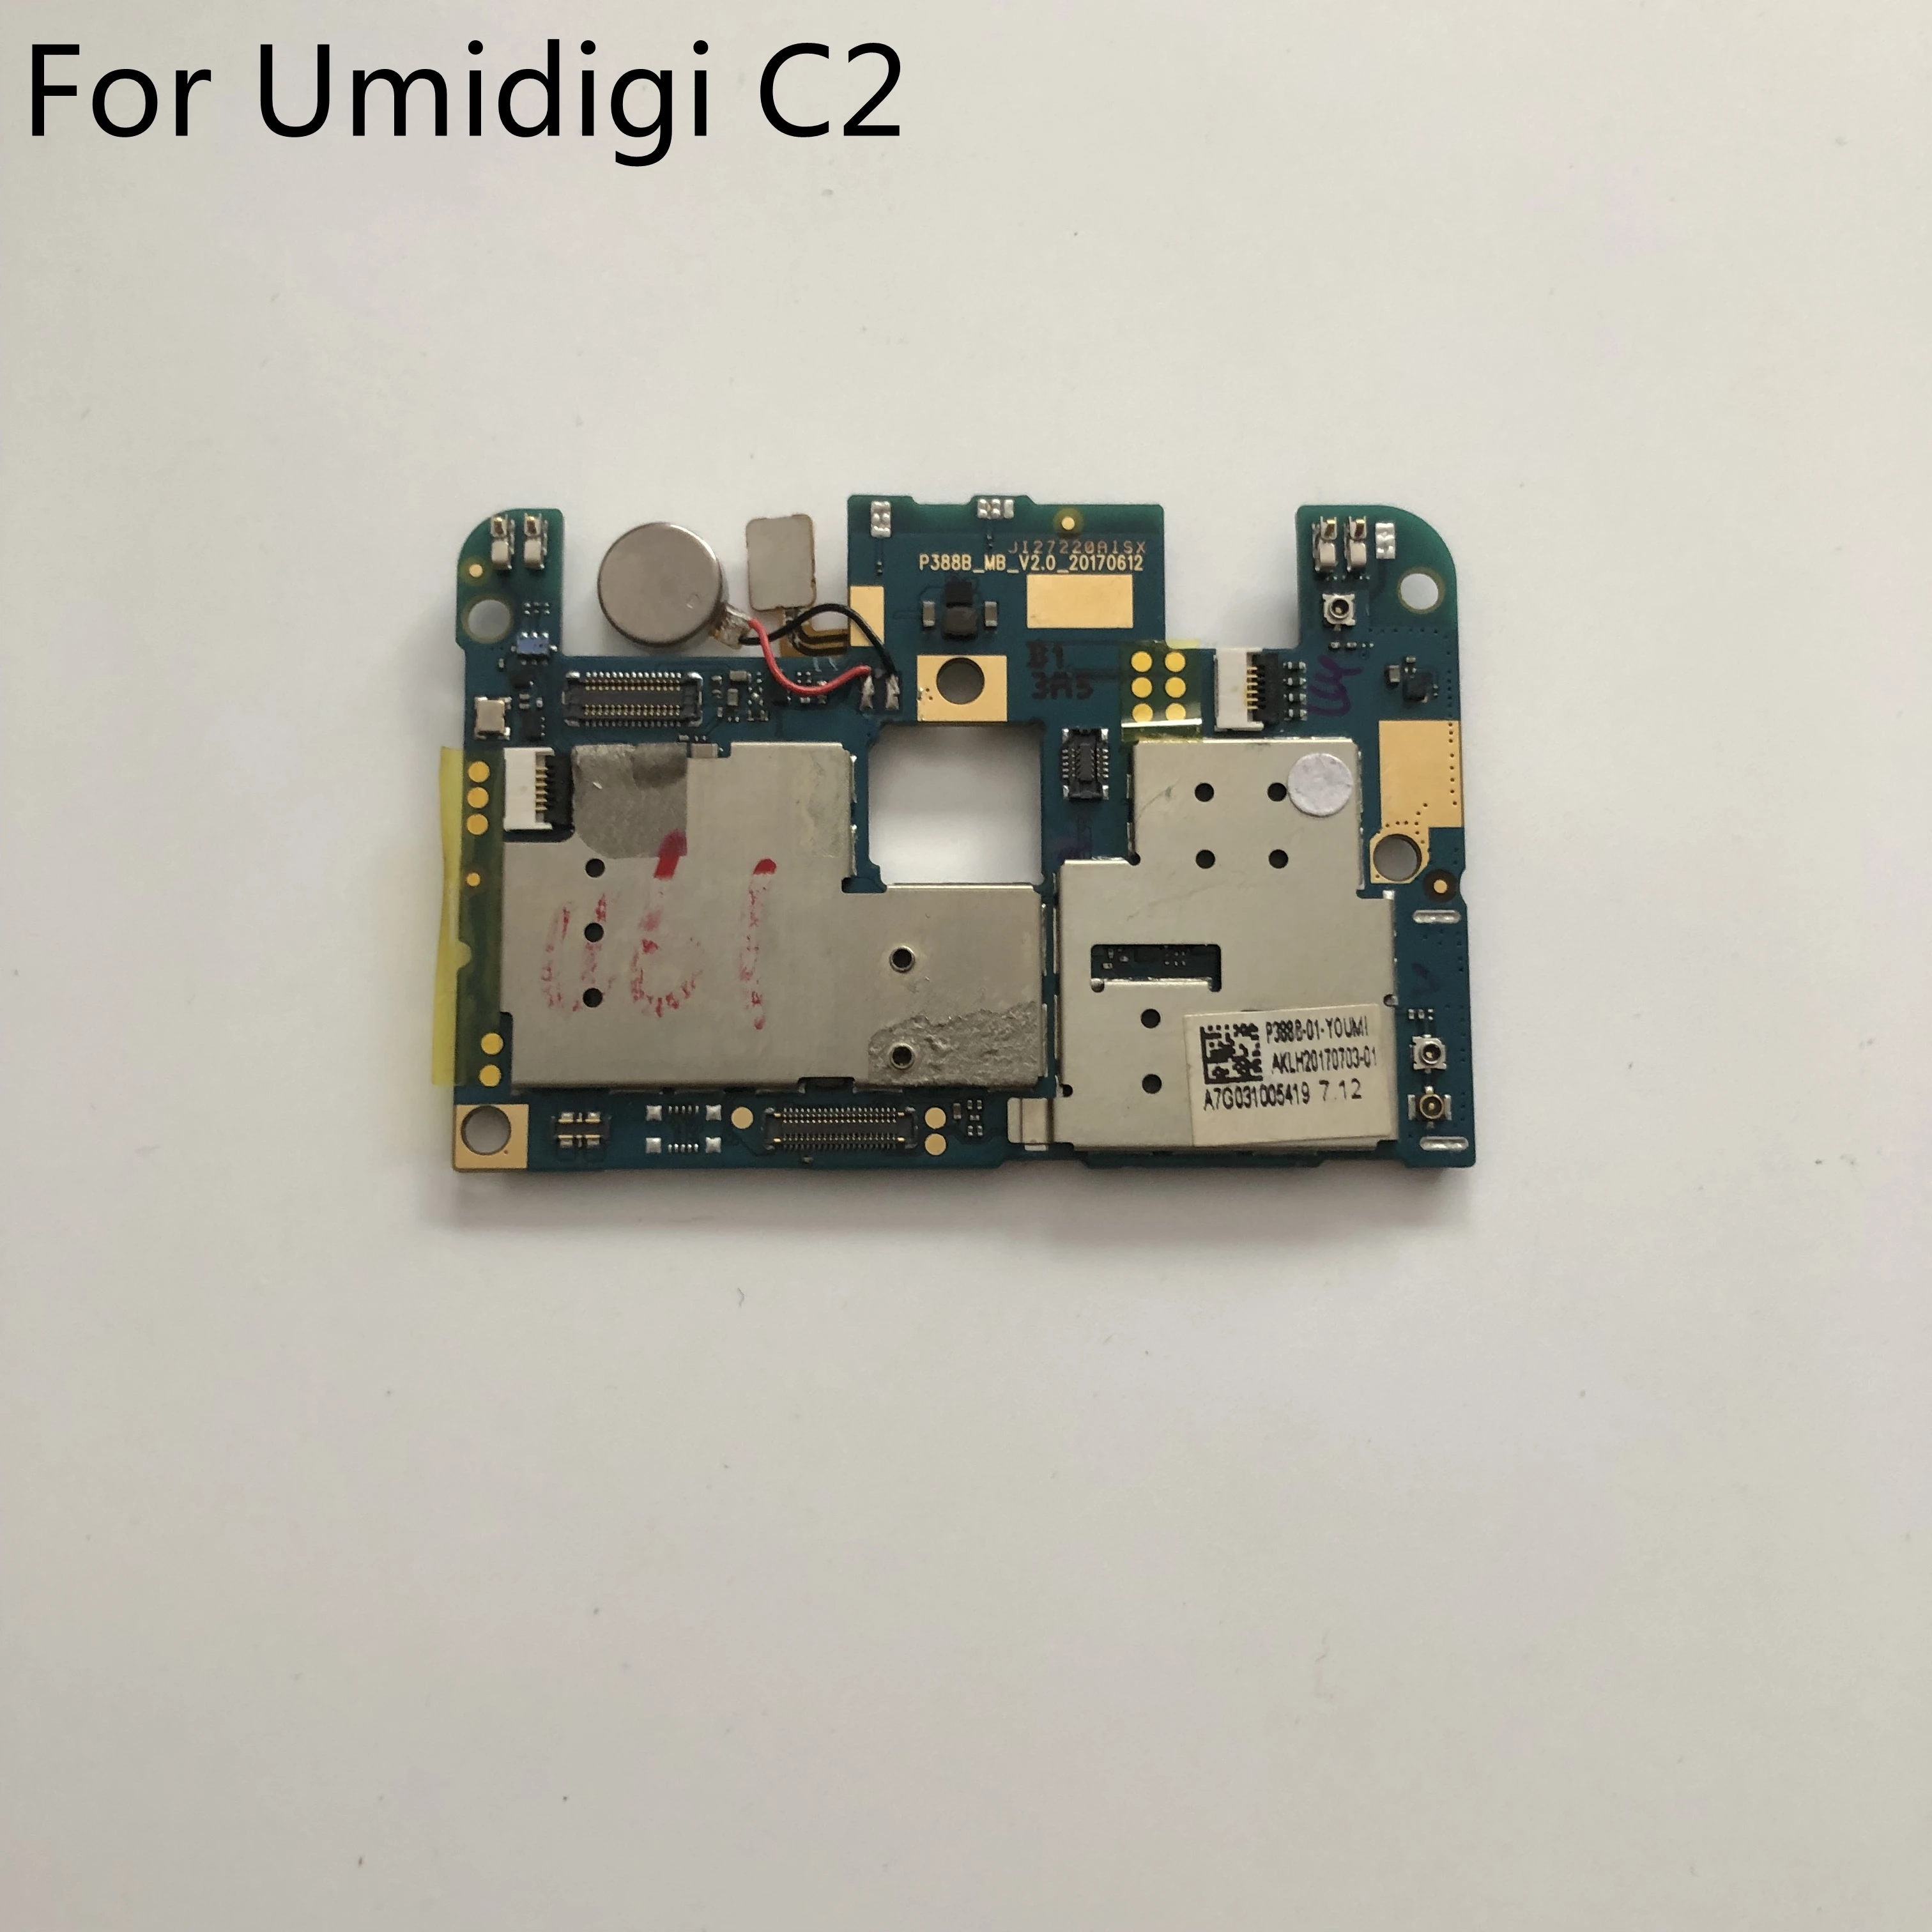 

Used Mainboard 4G RAM+64G ROM Motherboard For UMIDIGI C2 MTK6750T Octa Core 5.0" FHD 1080 x 1920 Smartphone Free Shipping